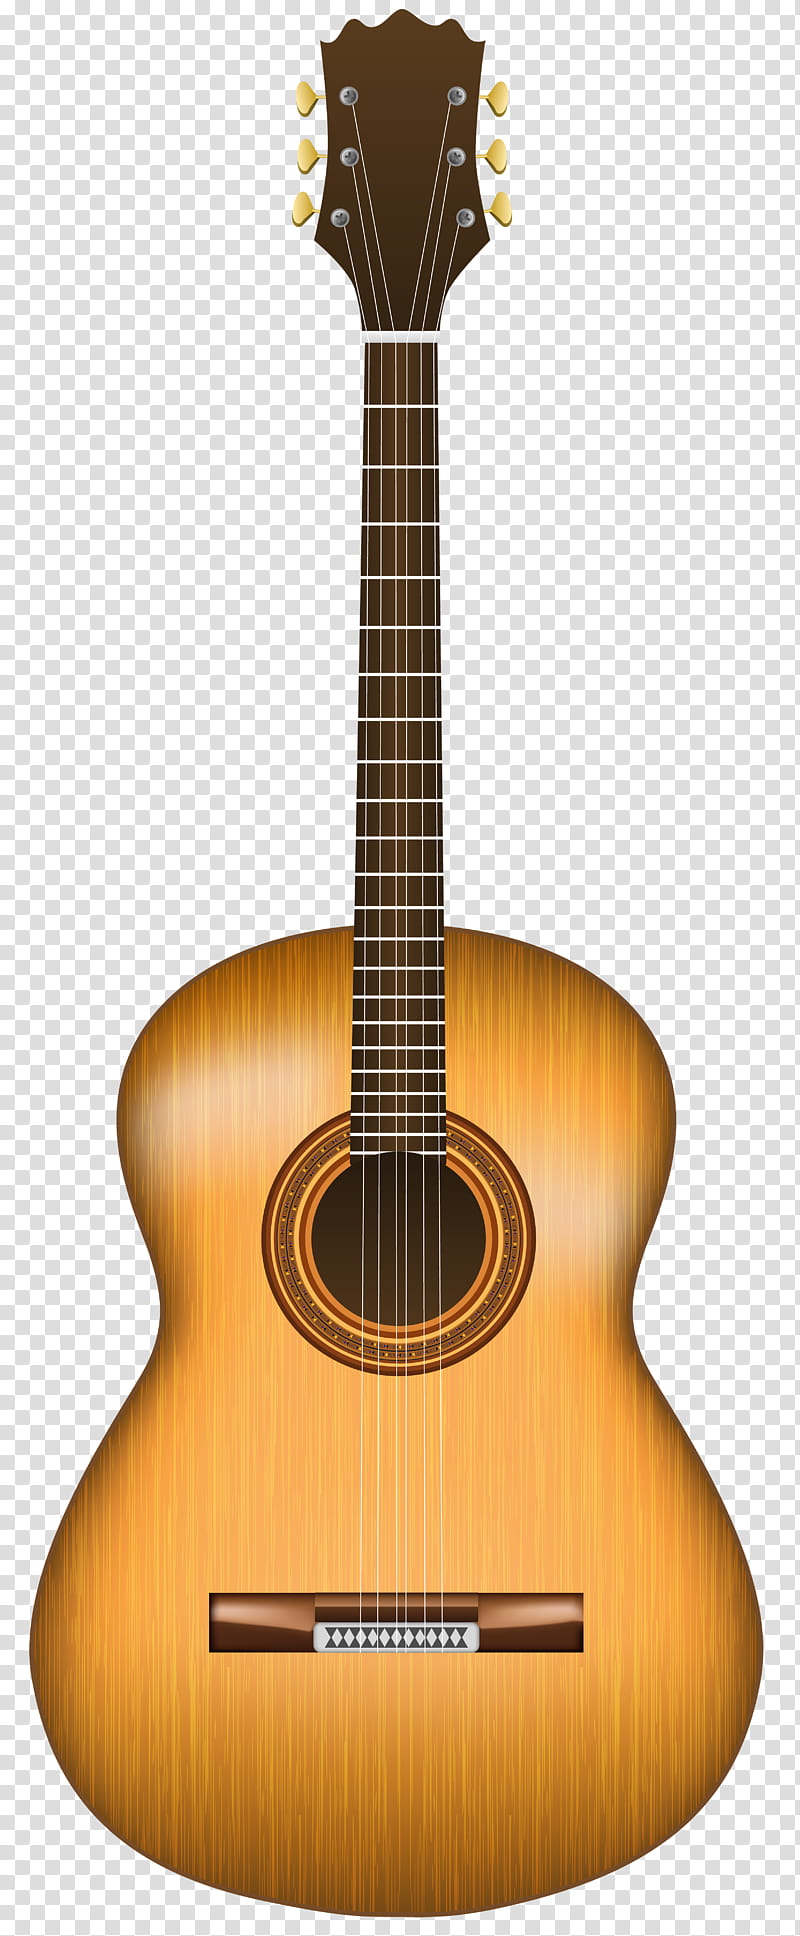 Music, Classical Guitar, Acoustic Guitar, Acousticelectric Guitar, Musical Instruments, String, Cordoba C3m Acoustic Guitar, Bass Guitar transparent background PNG clipart